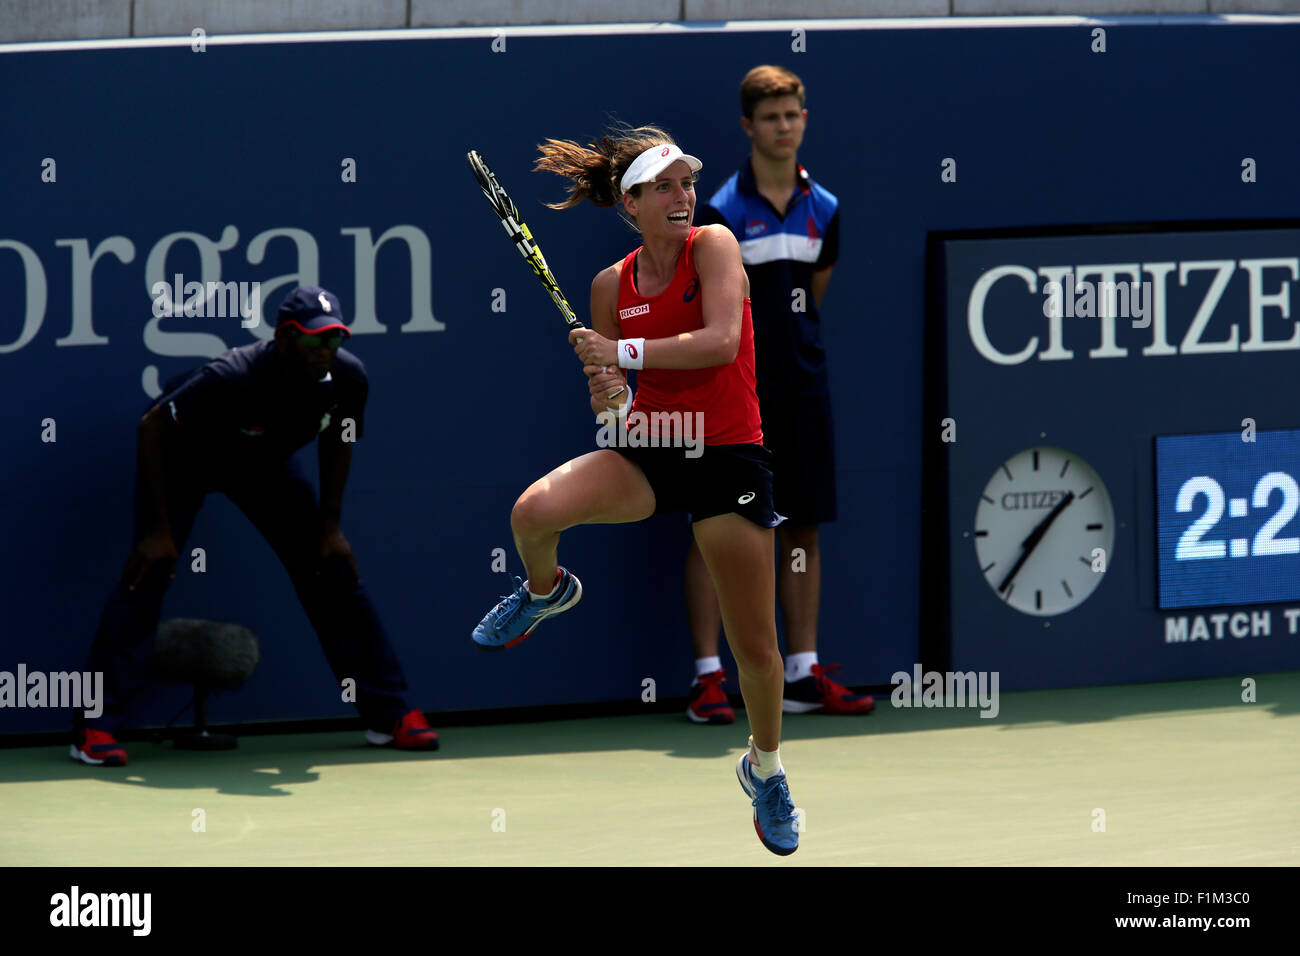 Britain's Johanna Konta en route to an upset  victory over Spain's Garbine Muguruza, the number 9 seed, during their second round match at the U.S. Open in Flushing Meadows, New York. Stock Photo